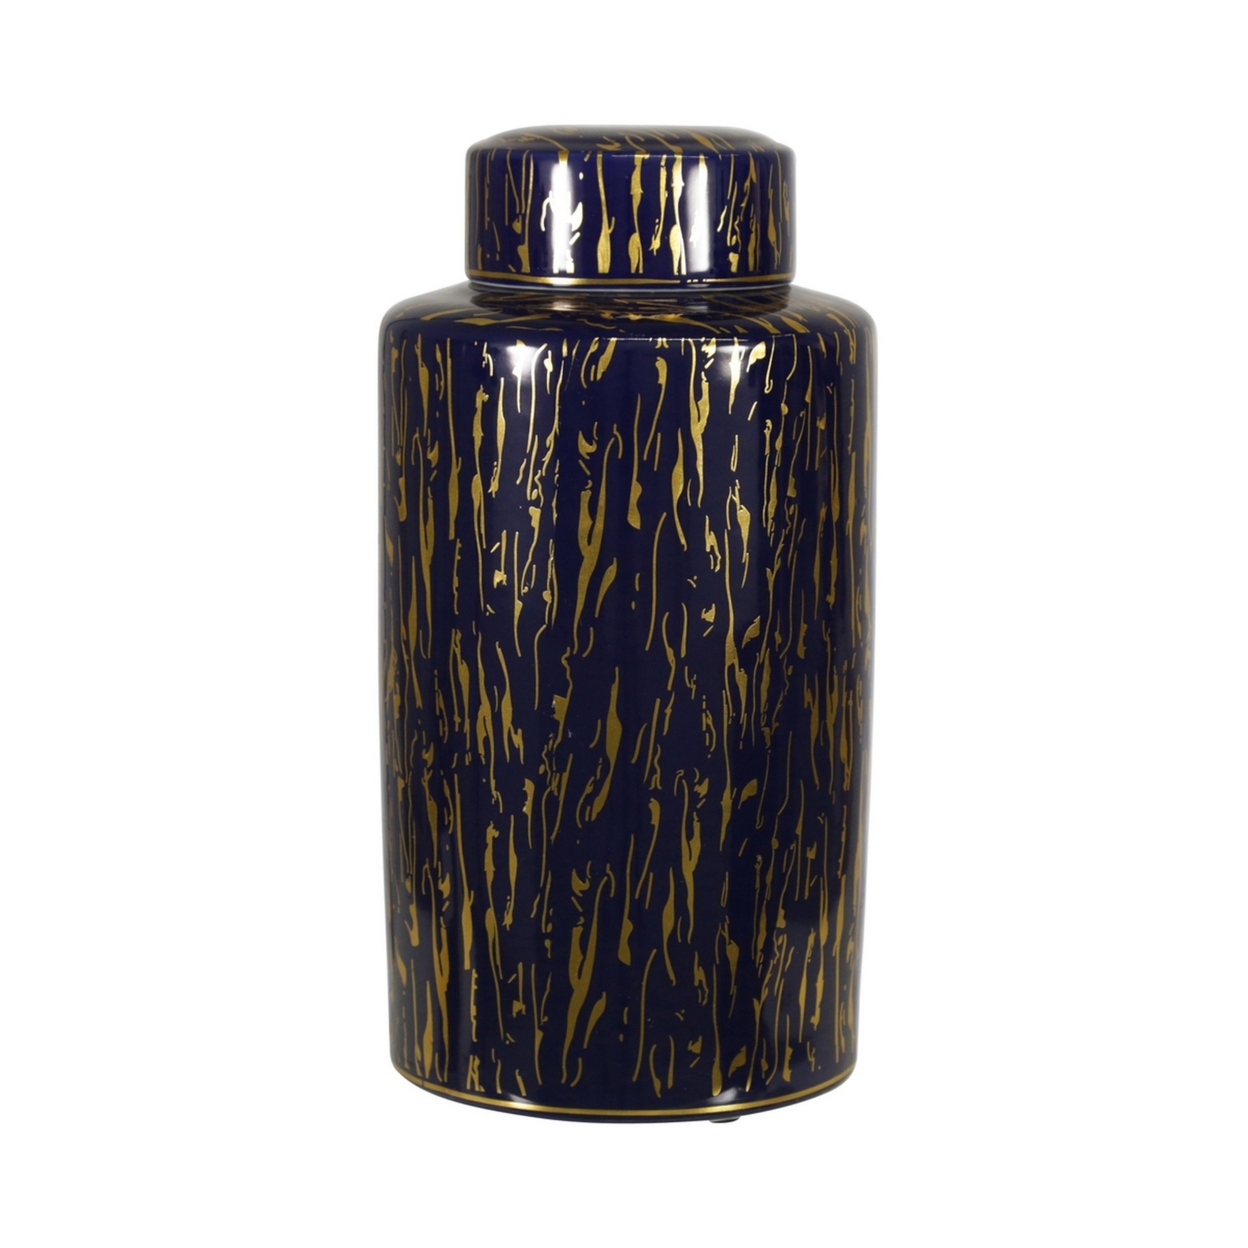 Jar With Lid Closure And Abstract Line Pattern, Gold- Saltoro Sherpi